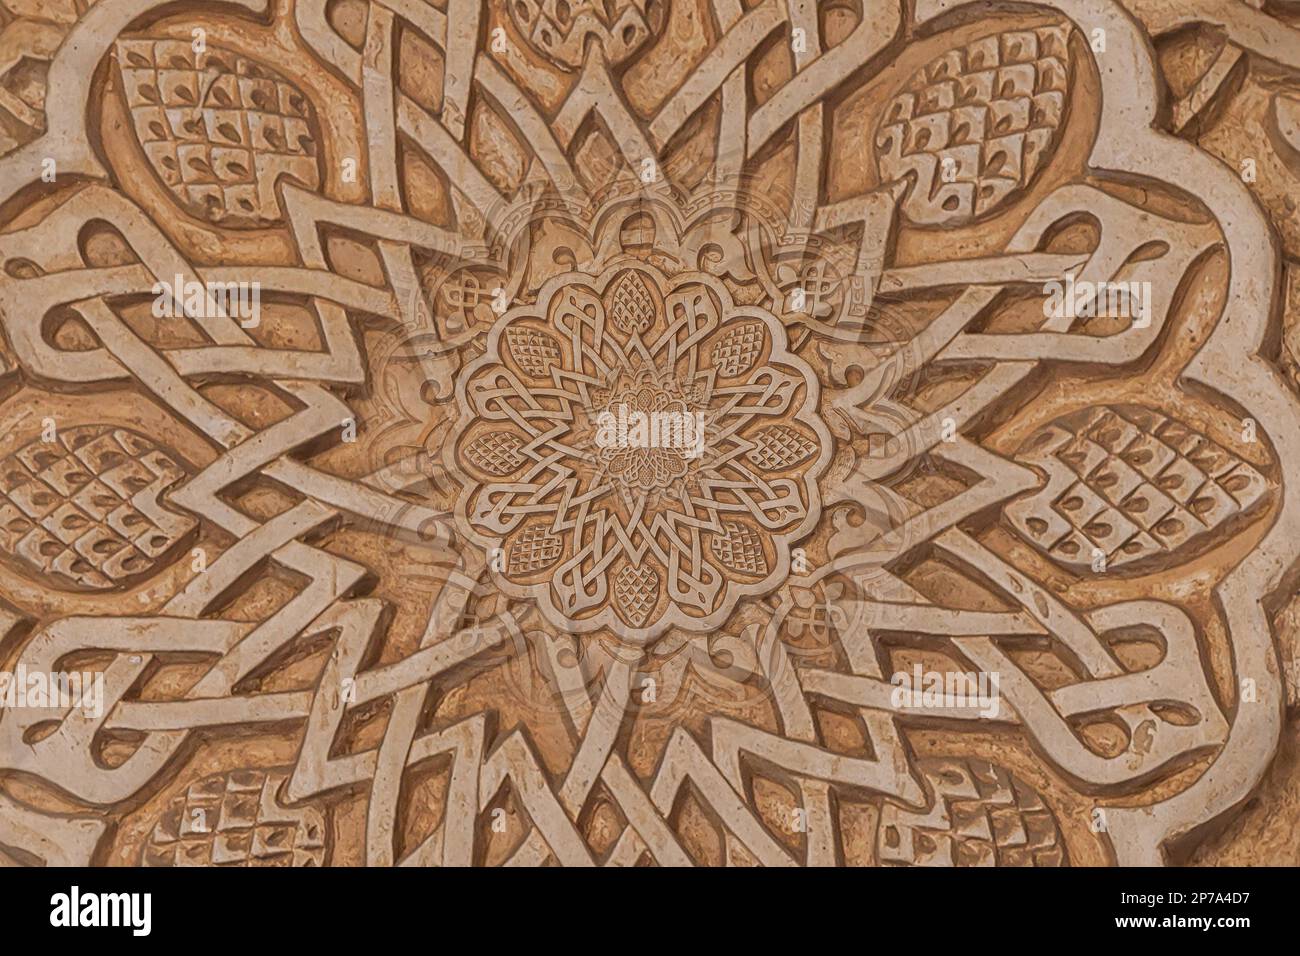 Arab background remanding to Islam culture. Design created from a 13th century architectural detail using droste effect Stock Photo